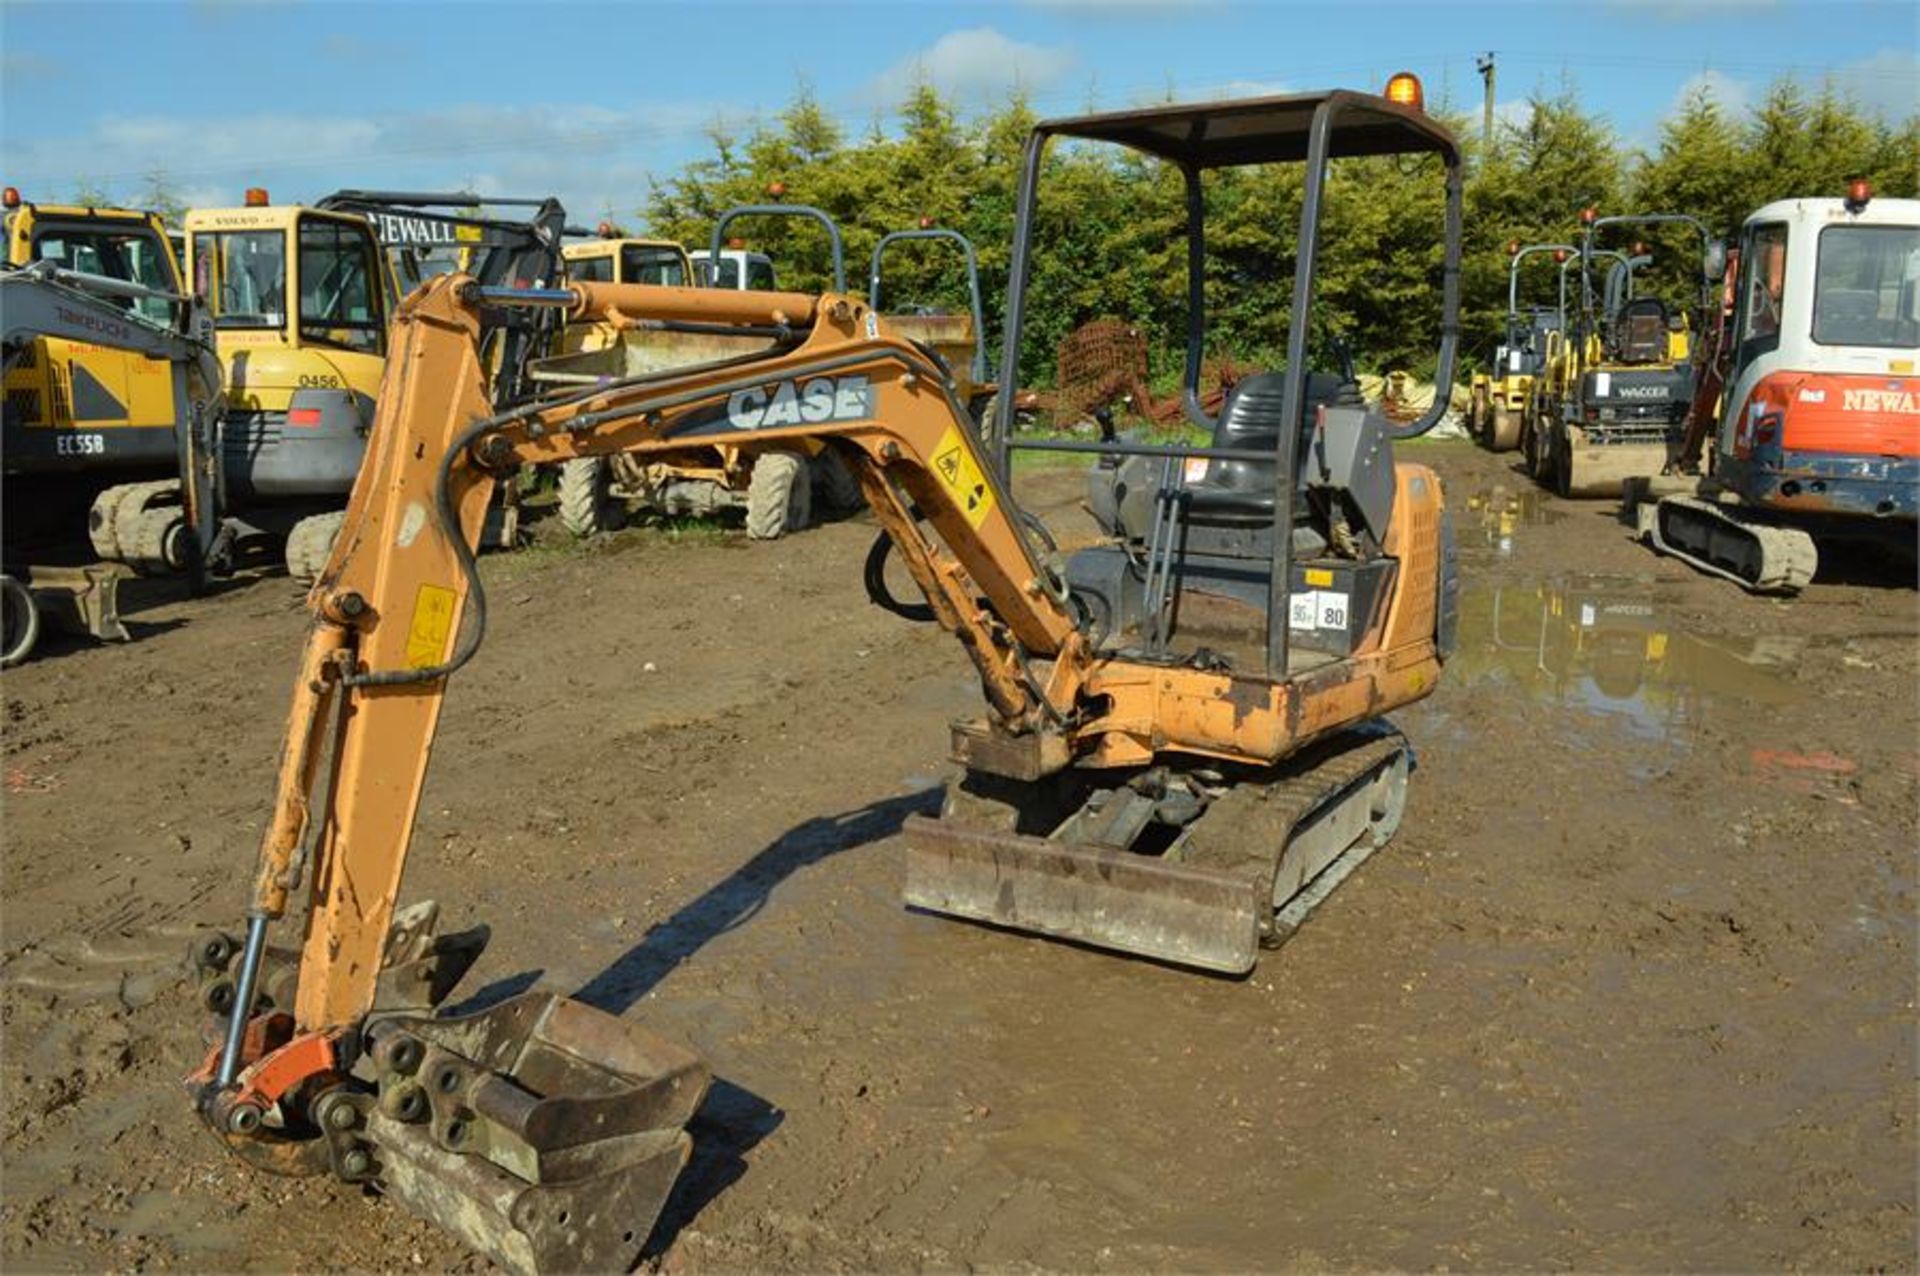 Case 1.5t Rubber Tracked Excavator with Blade